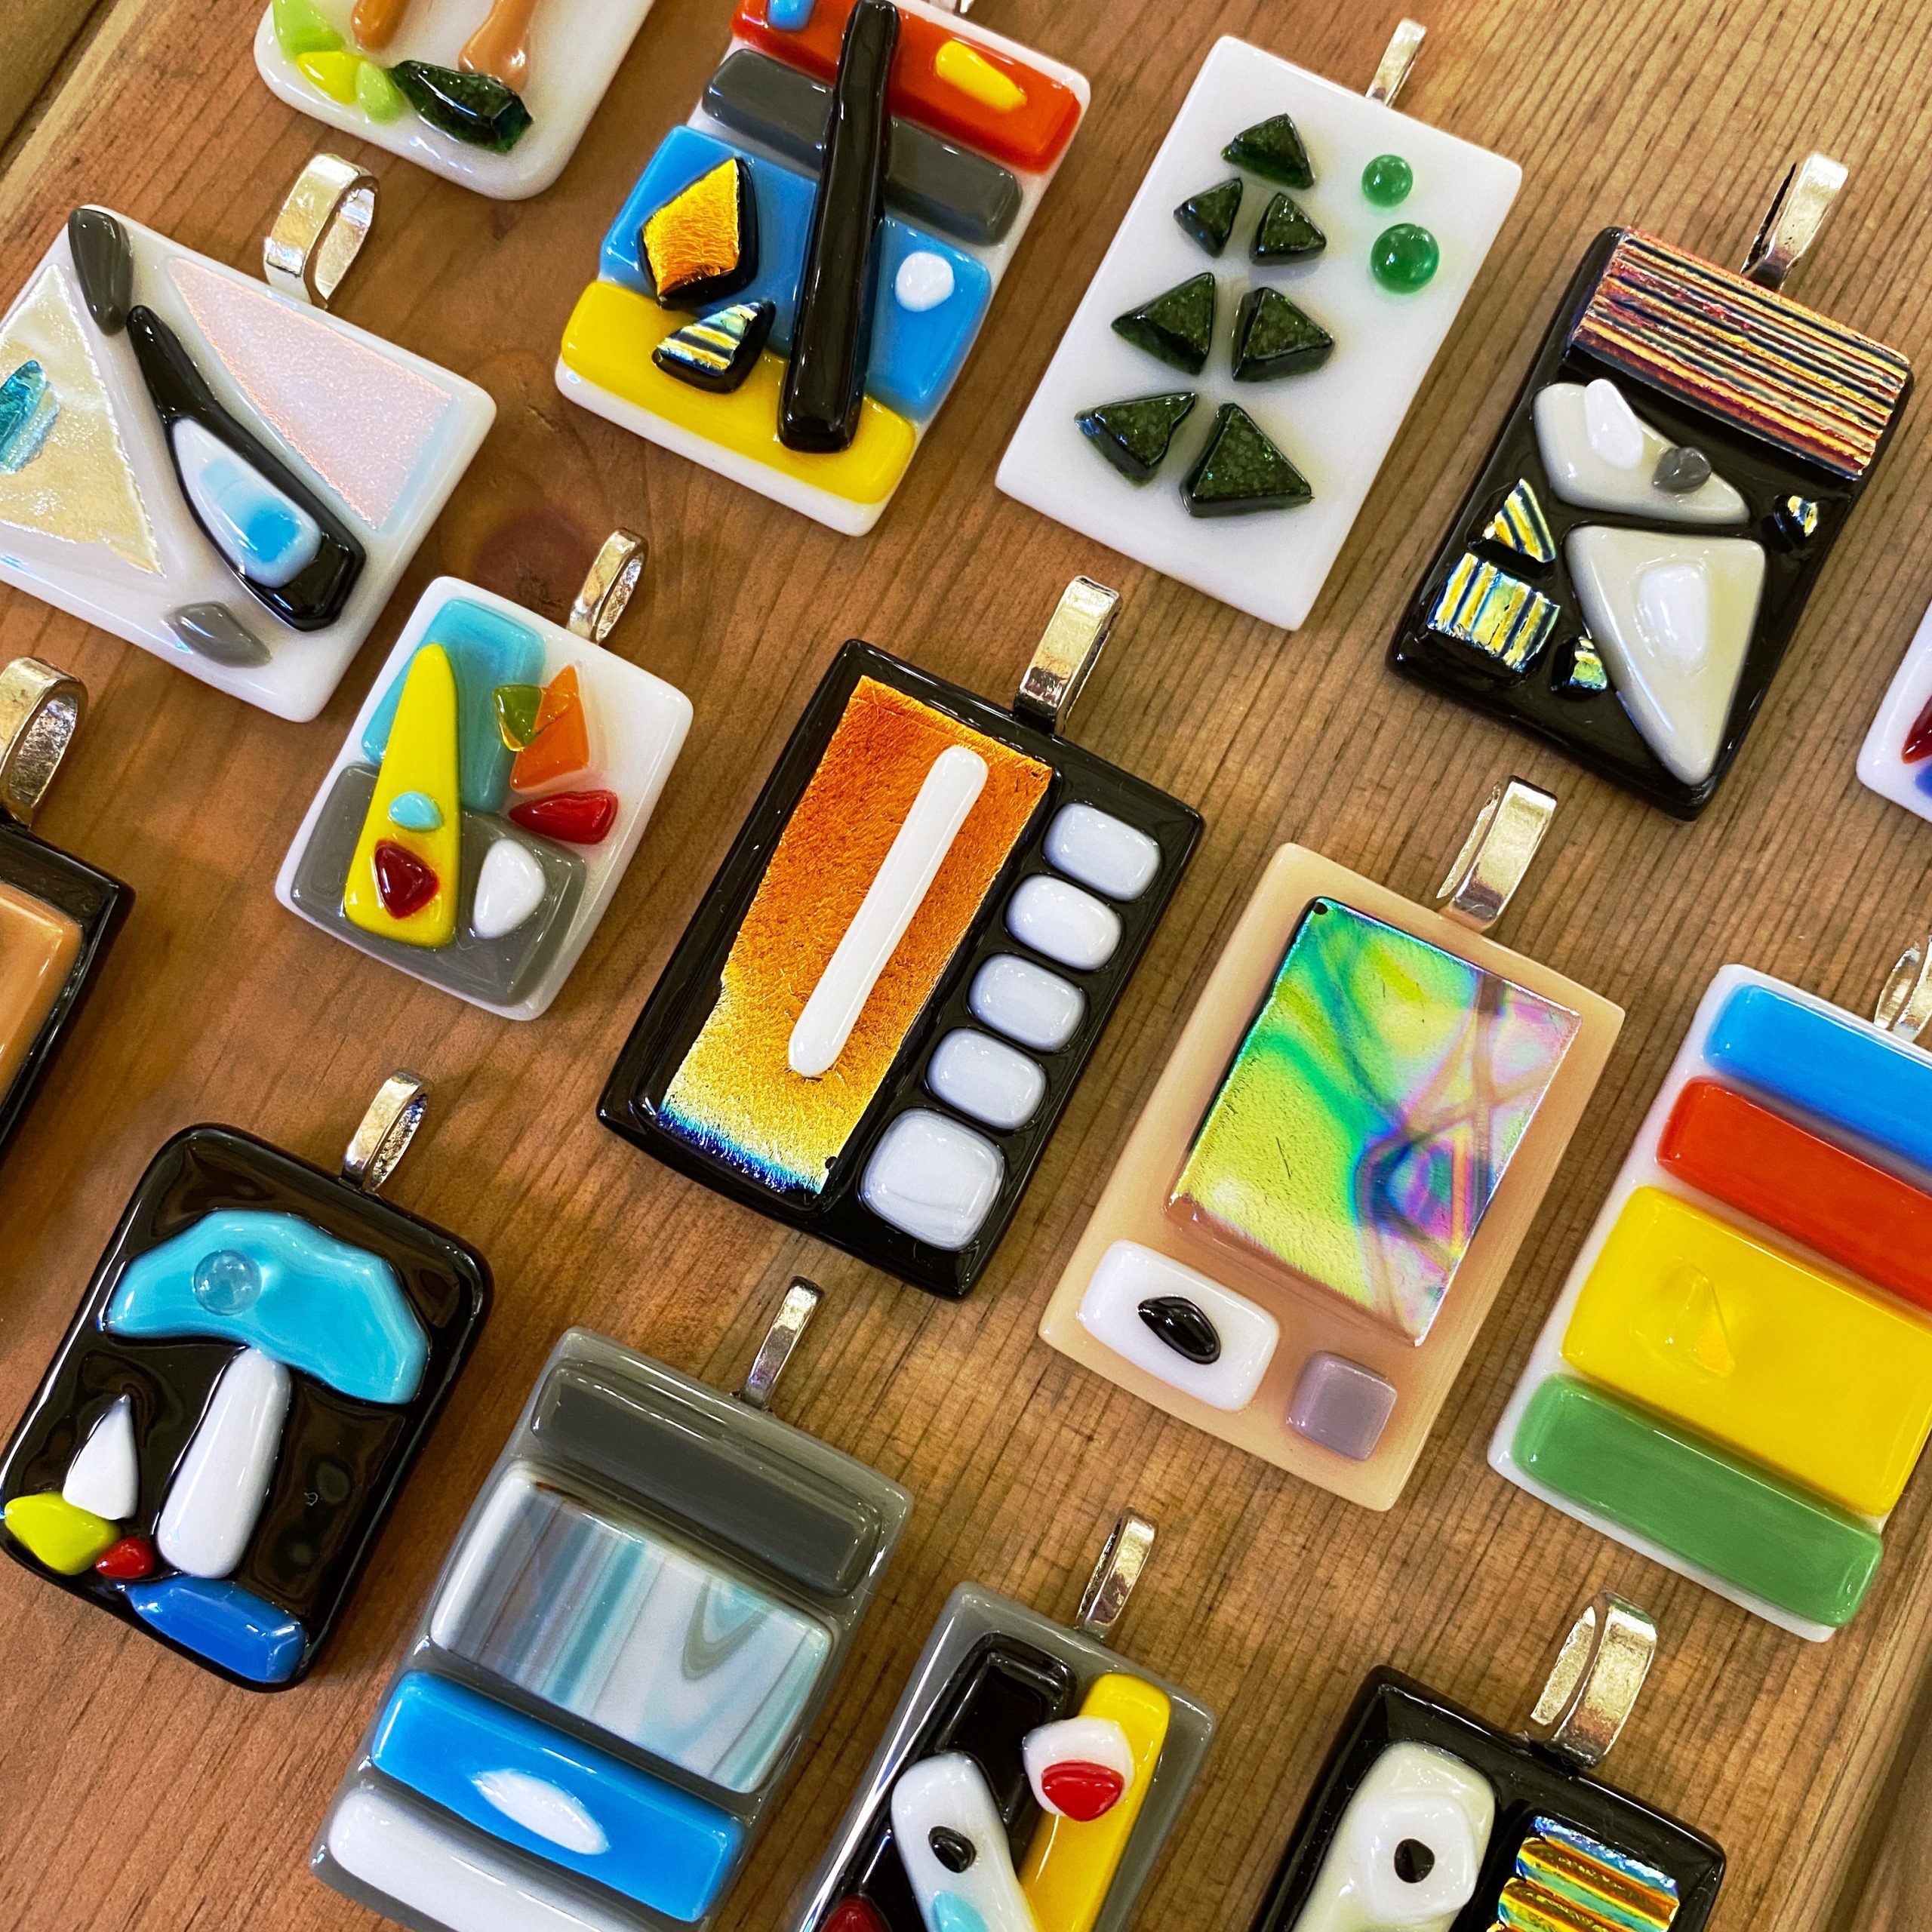 Folk Art with Acrylic Paints & Resin with Michelle Hamilton - River Arts  District Artists